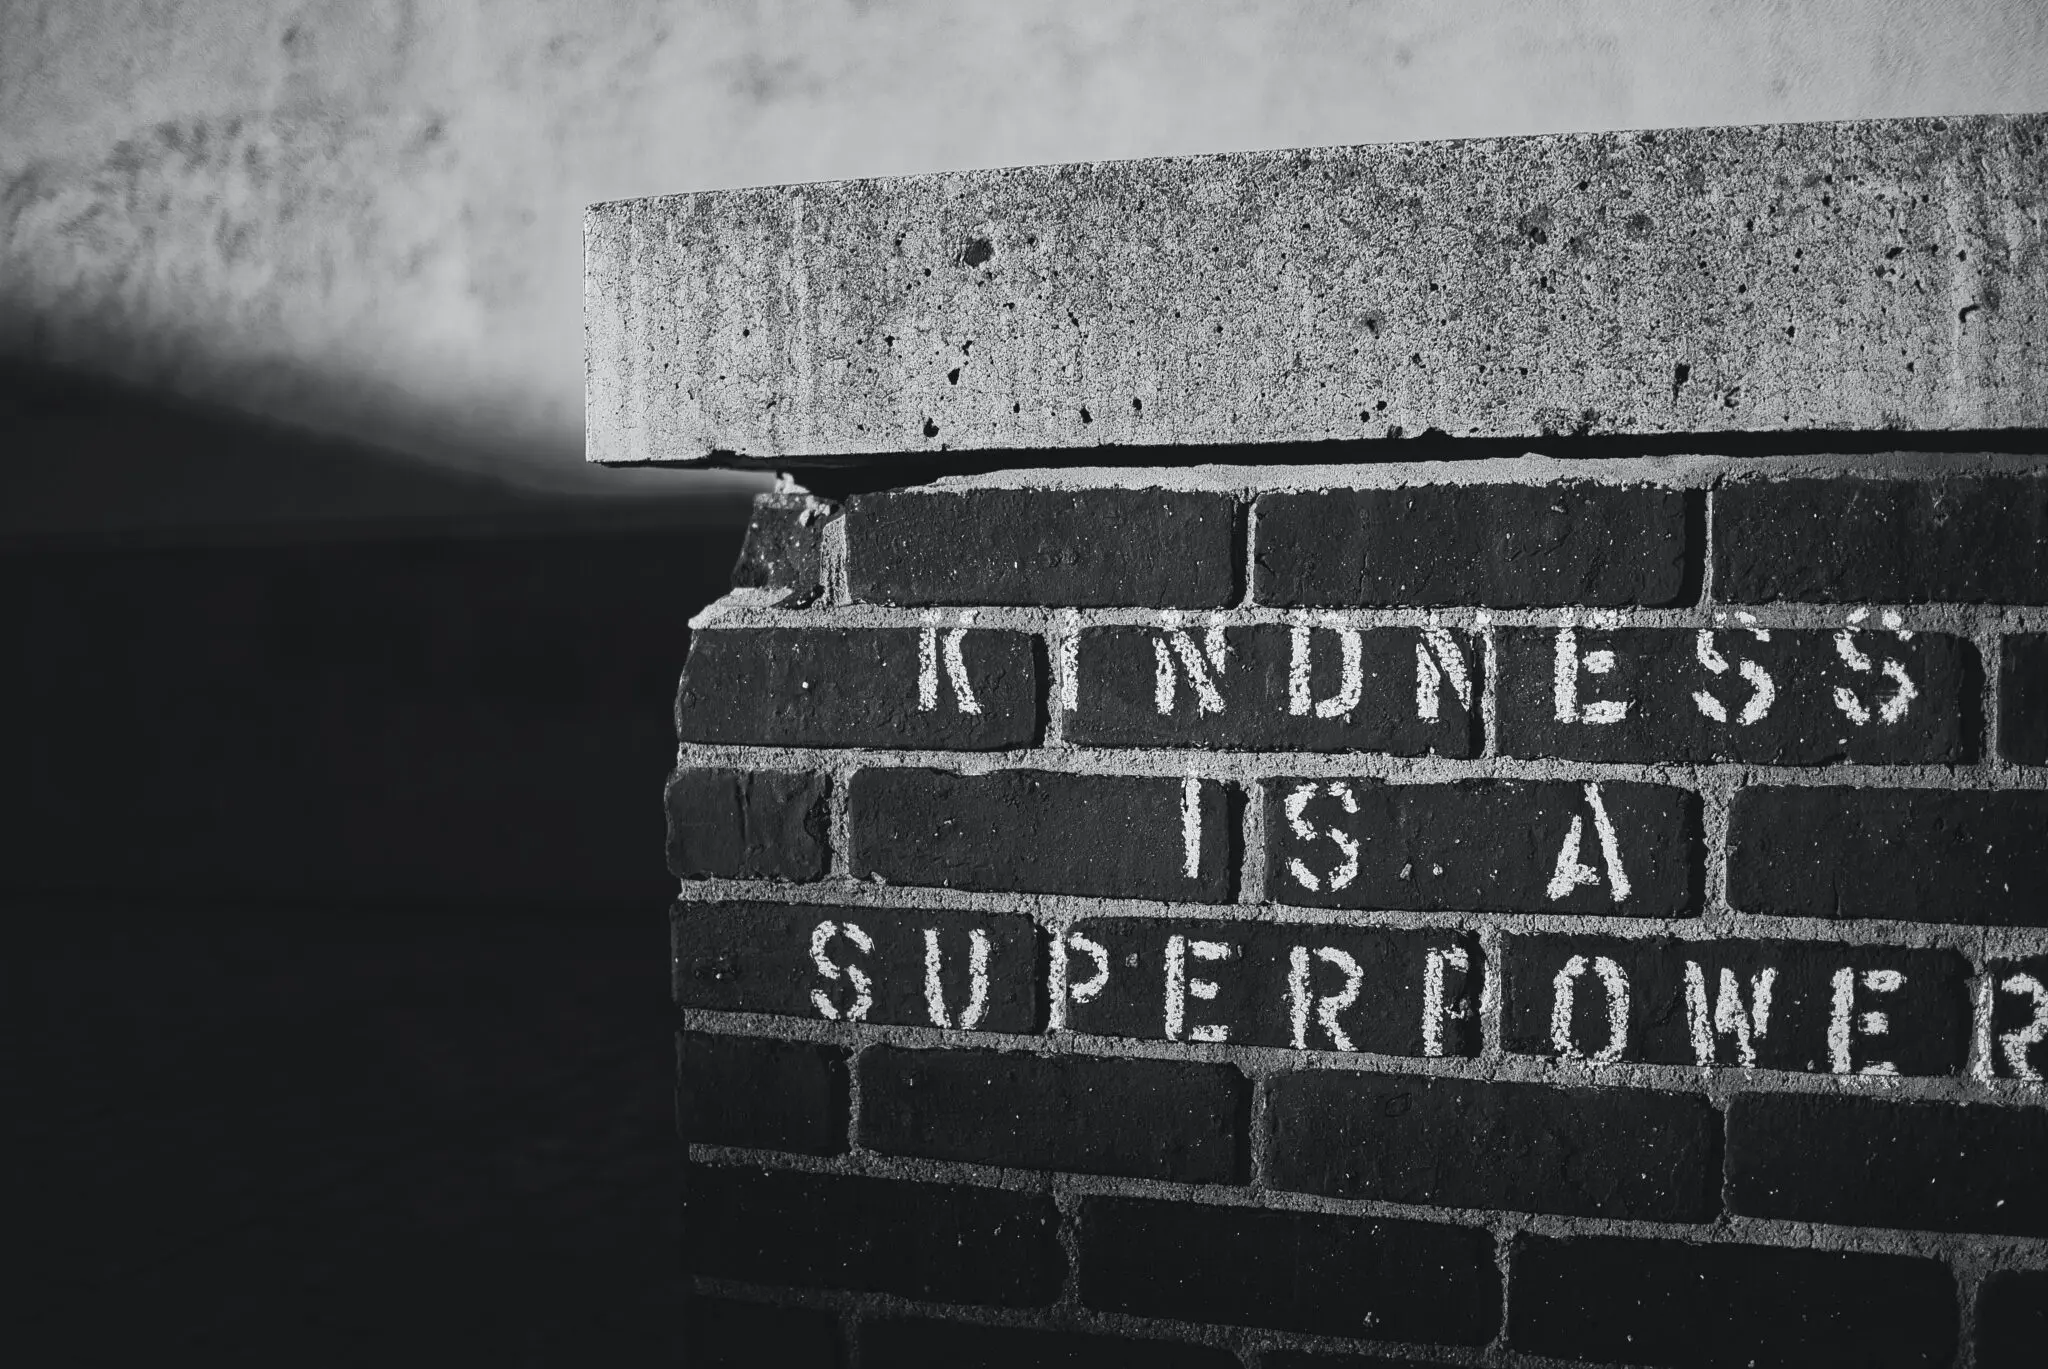 The phrase 'Kindness is a Superpower' is painted onto a brick wall.